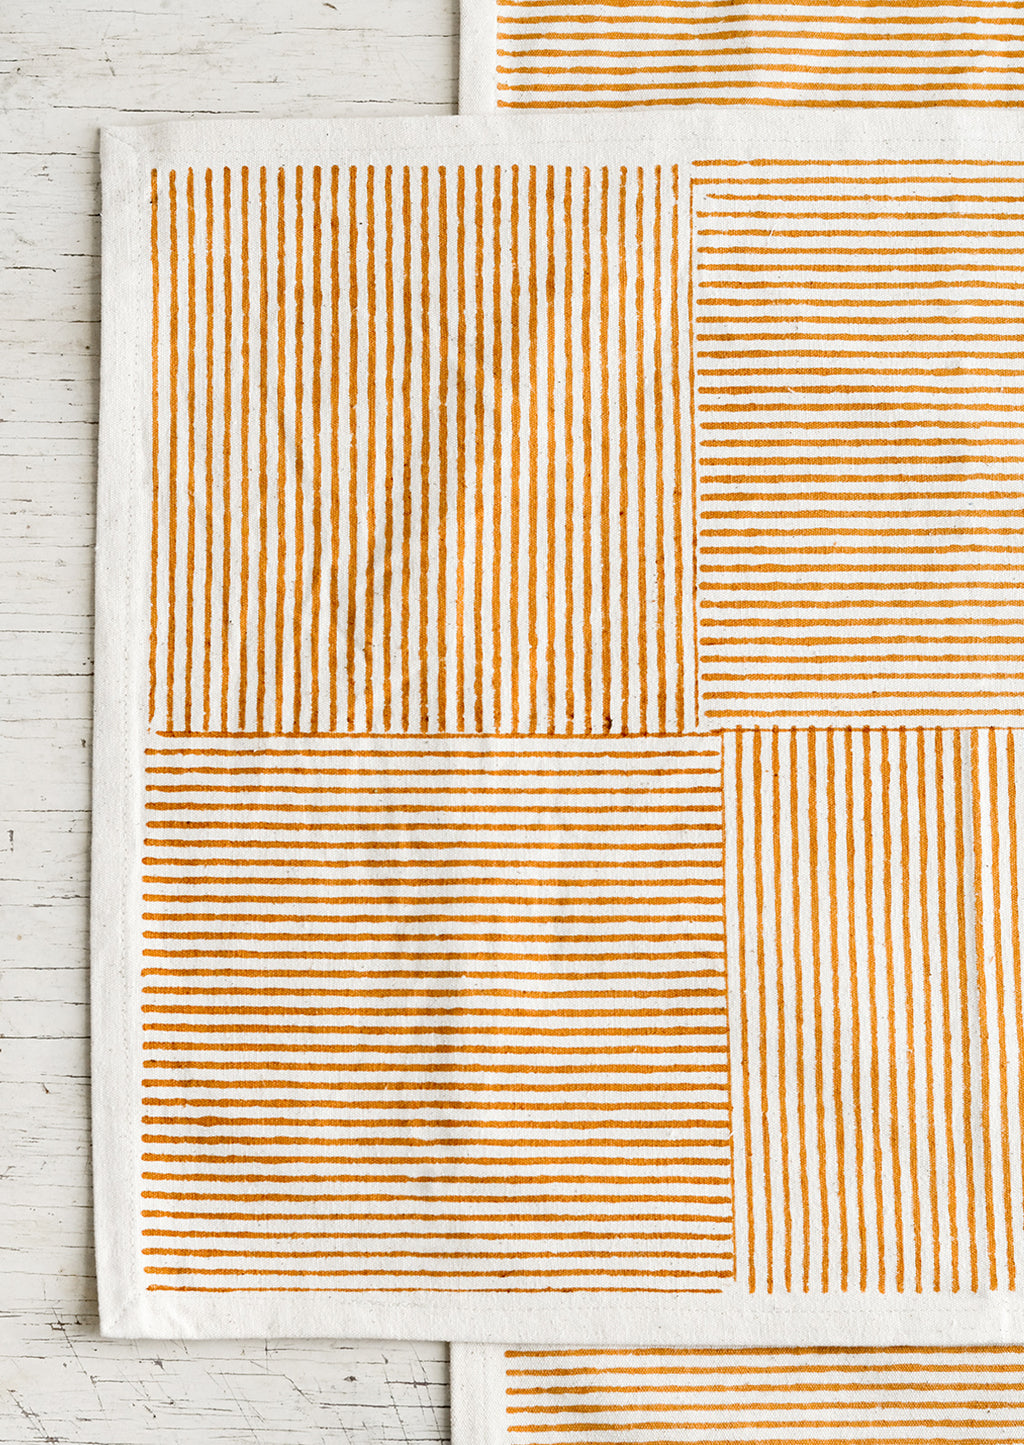 Natural / Ochre: Block printed cotton placemats with boxed stripe pattern in ochre.